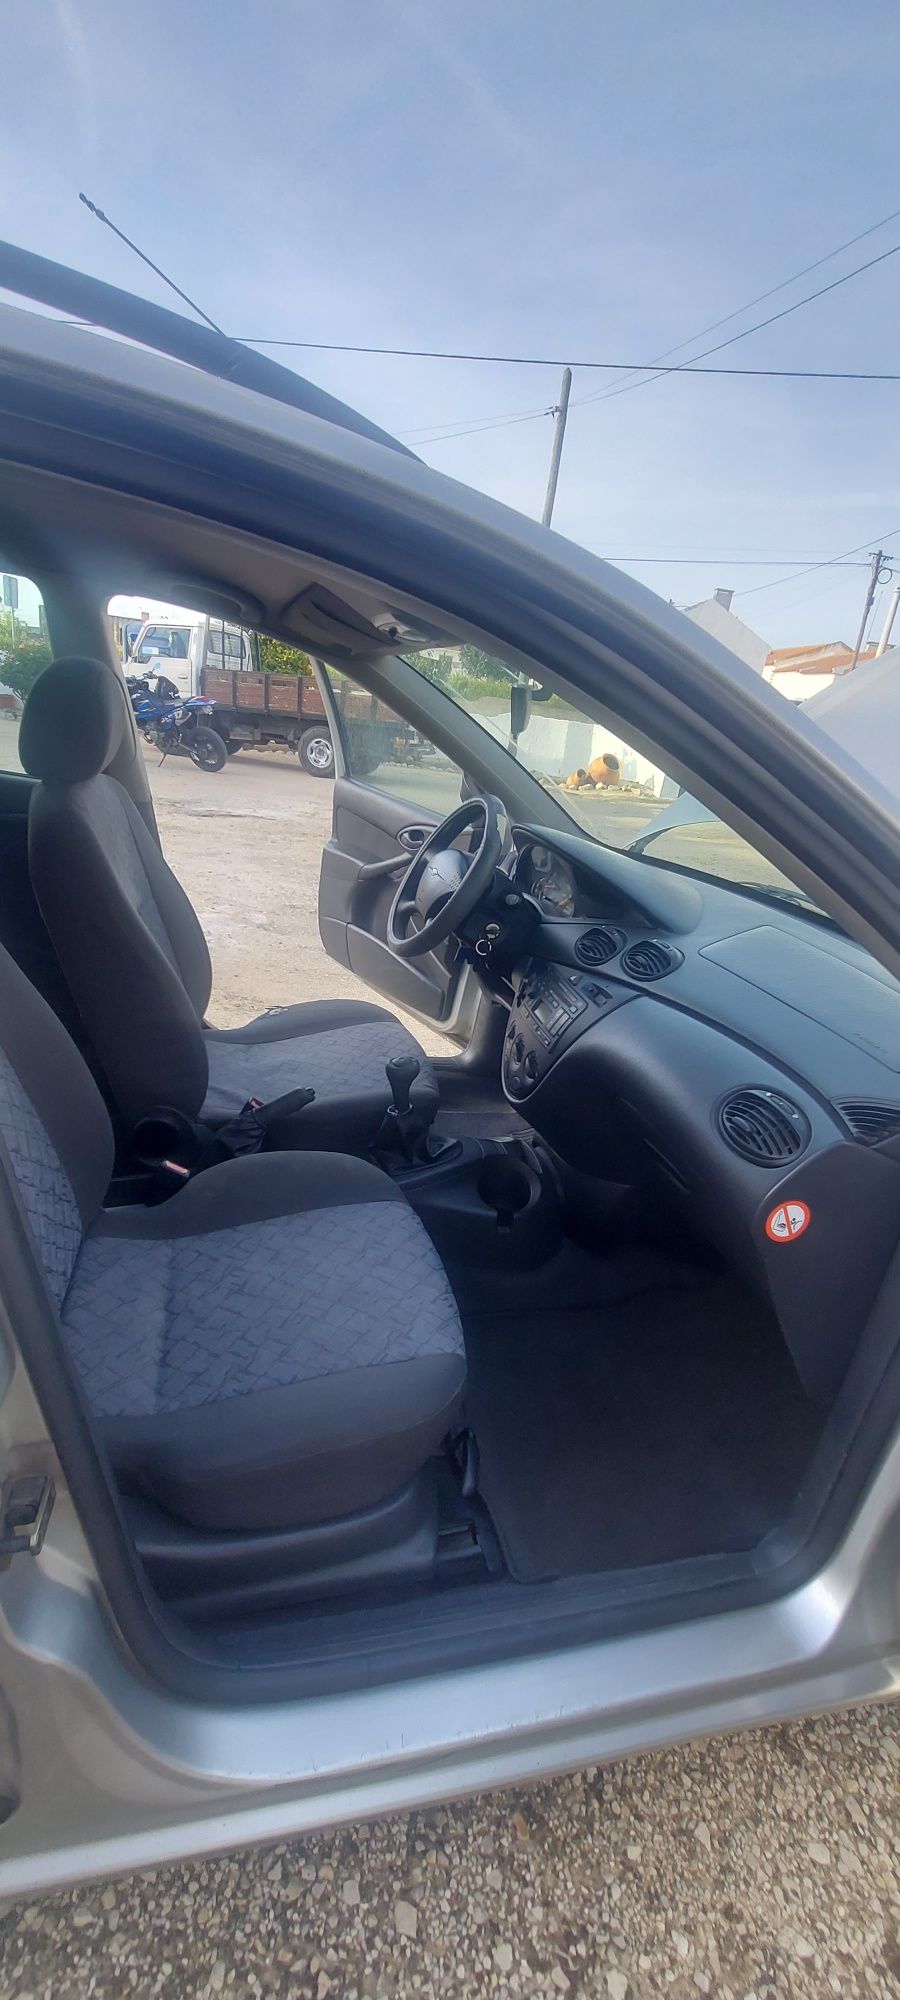 Ford Focus 1.4 Ambiente Station